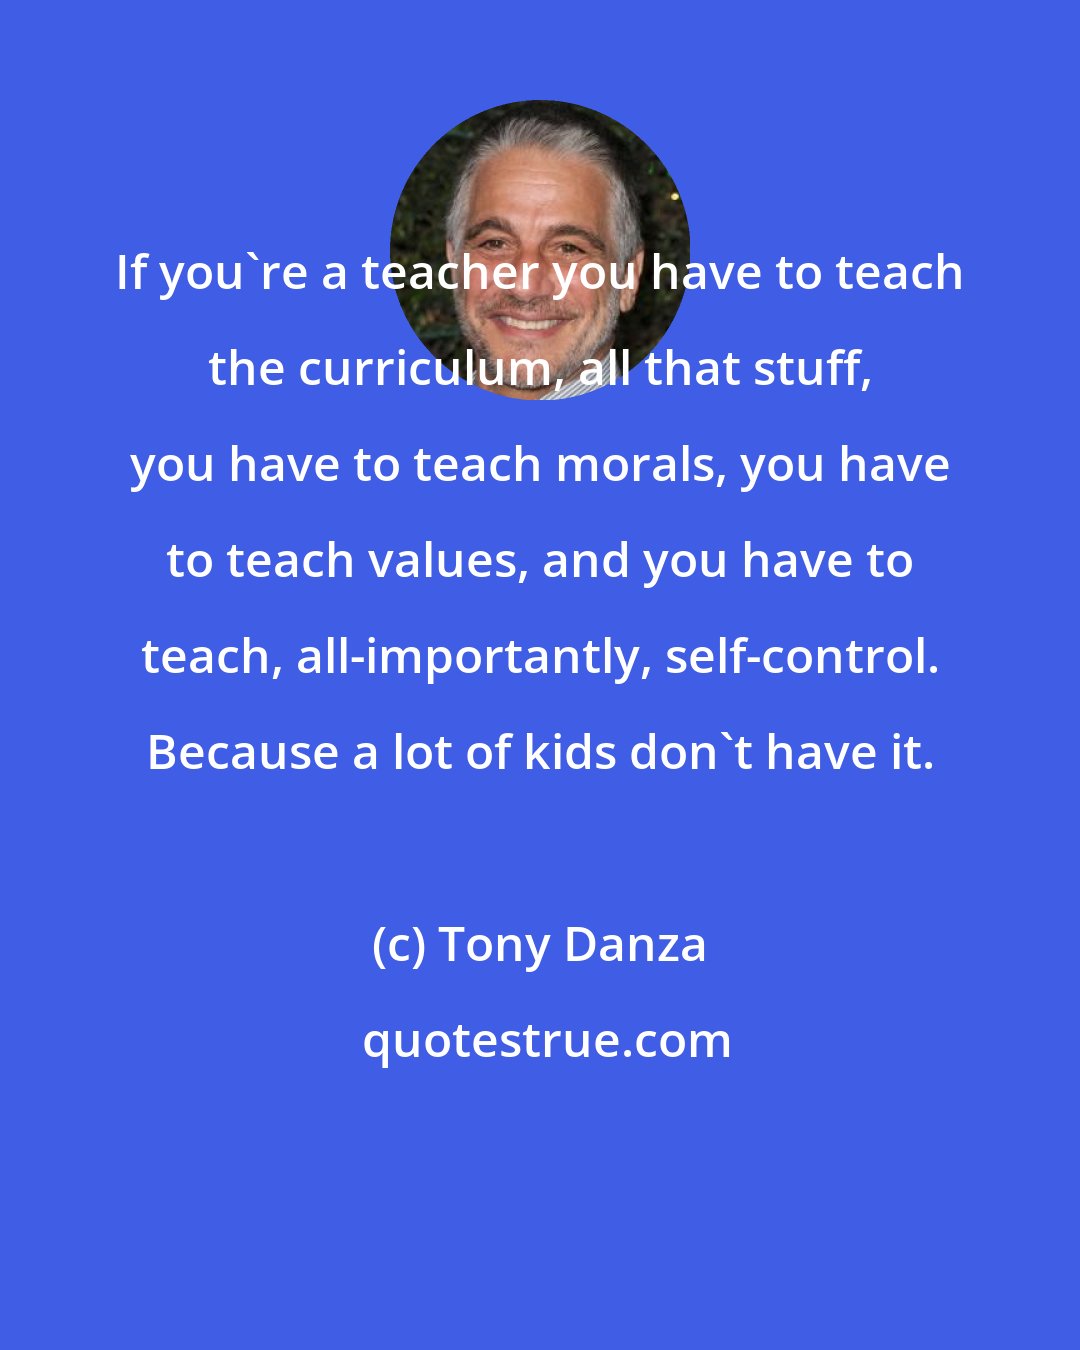 Tony Danza: If you're a teacher you have to teach the curriculum, all that stuff, you have to teach morals, you have to teach values, and you have to teach, all-importantly, self-control. Because a lot of kids don't have it.